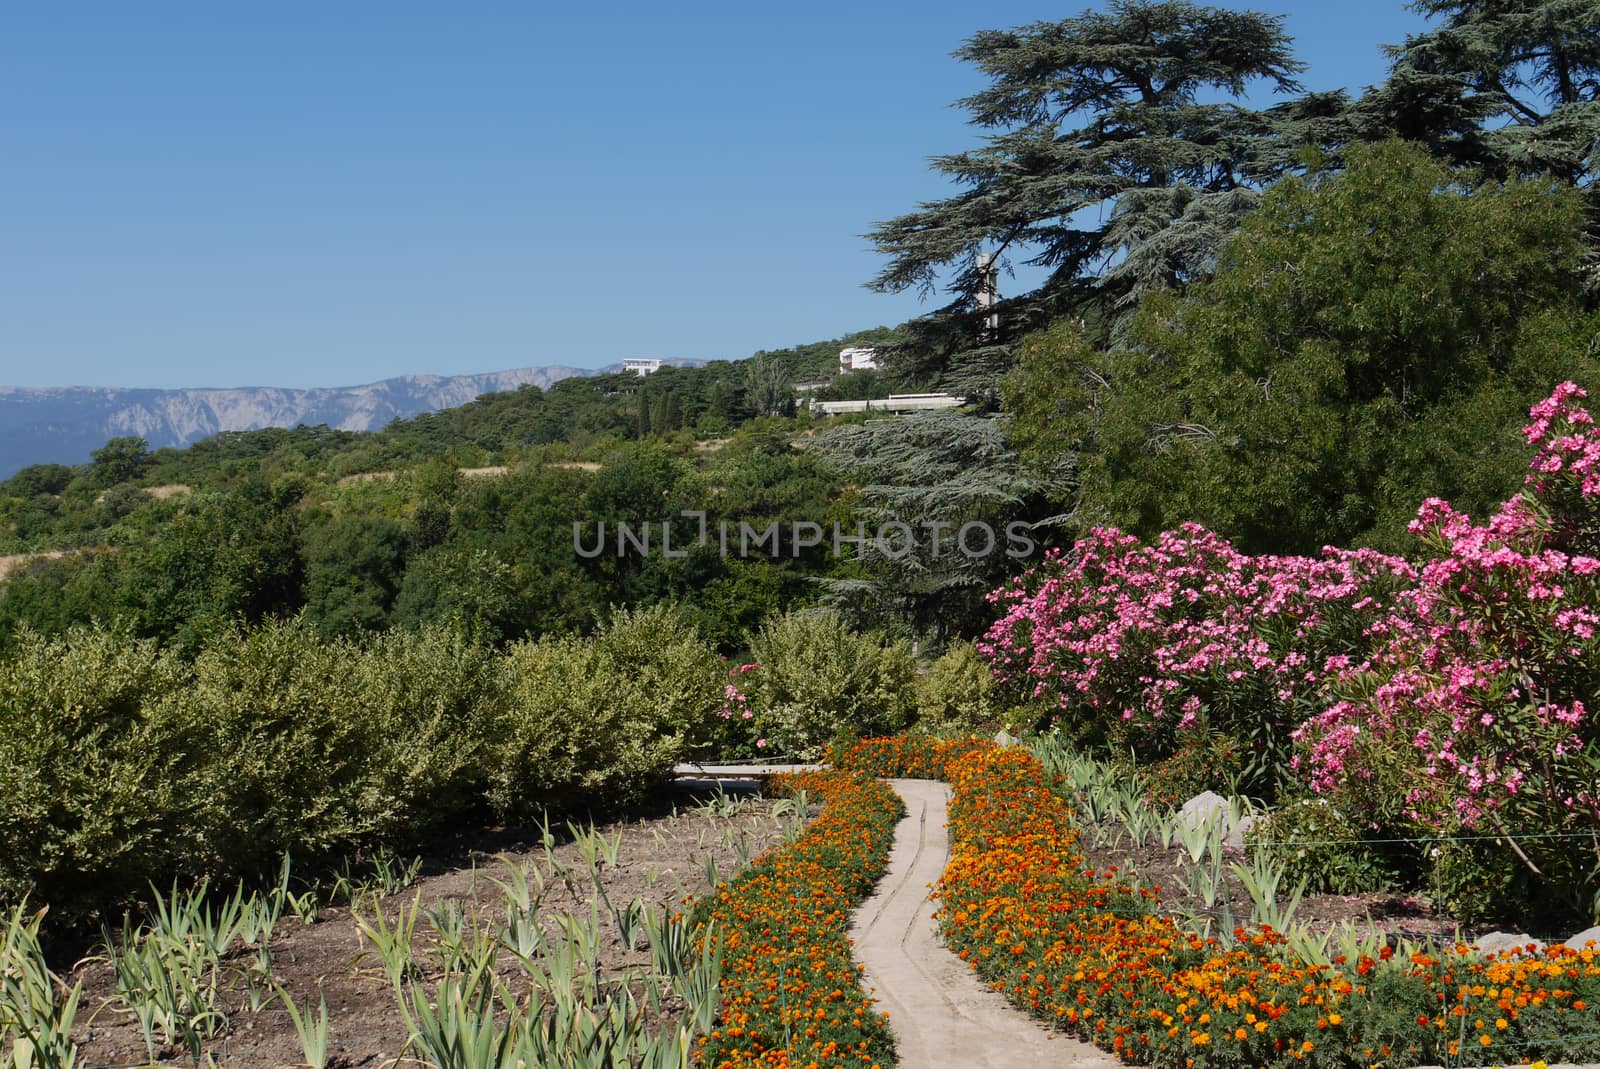 a magnificent view from the walkway between the green bushes and beautiful flowers to the mountain peaks on the lindens of the horizon under the blue sky